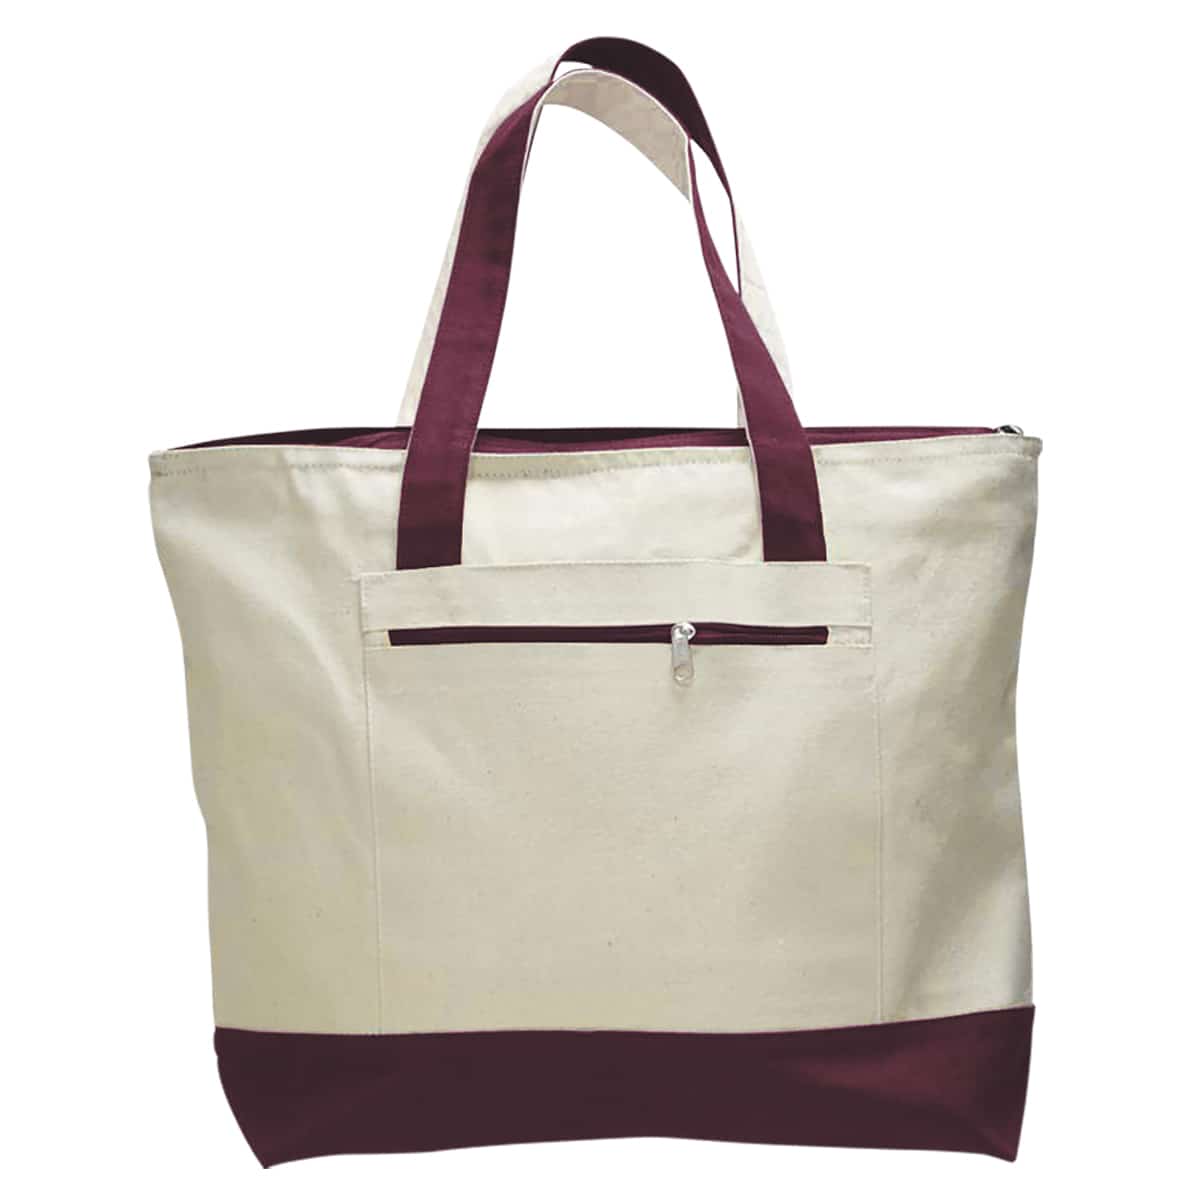 Heavy Large Canvas Tote Bag With Zipper and Color Handles